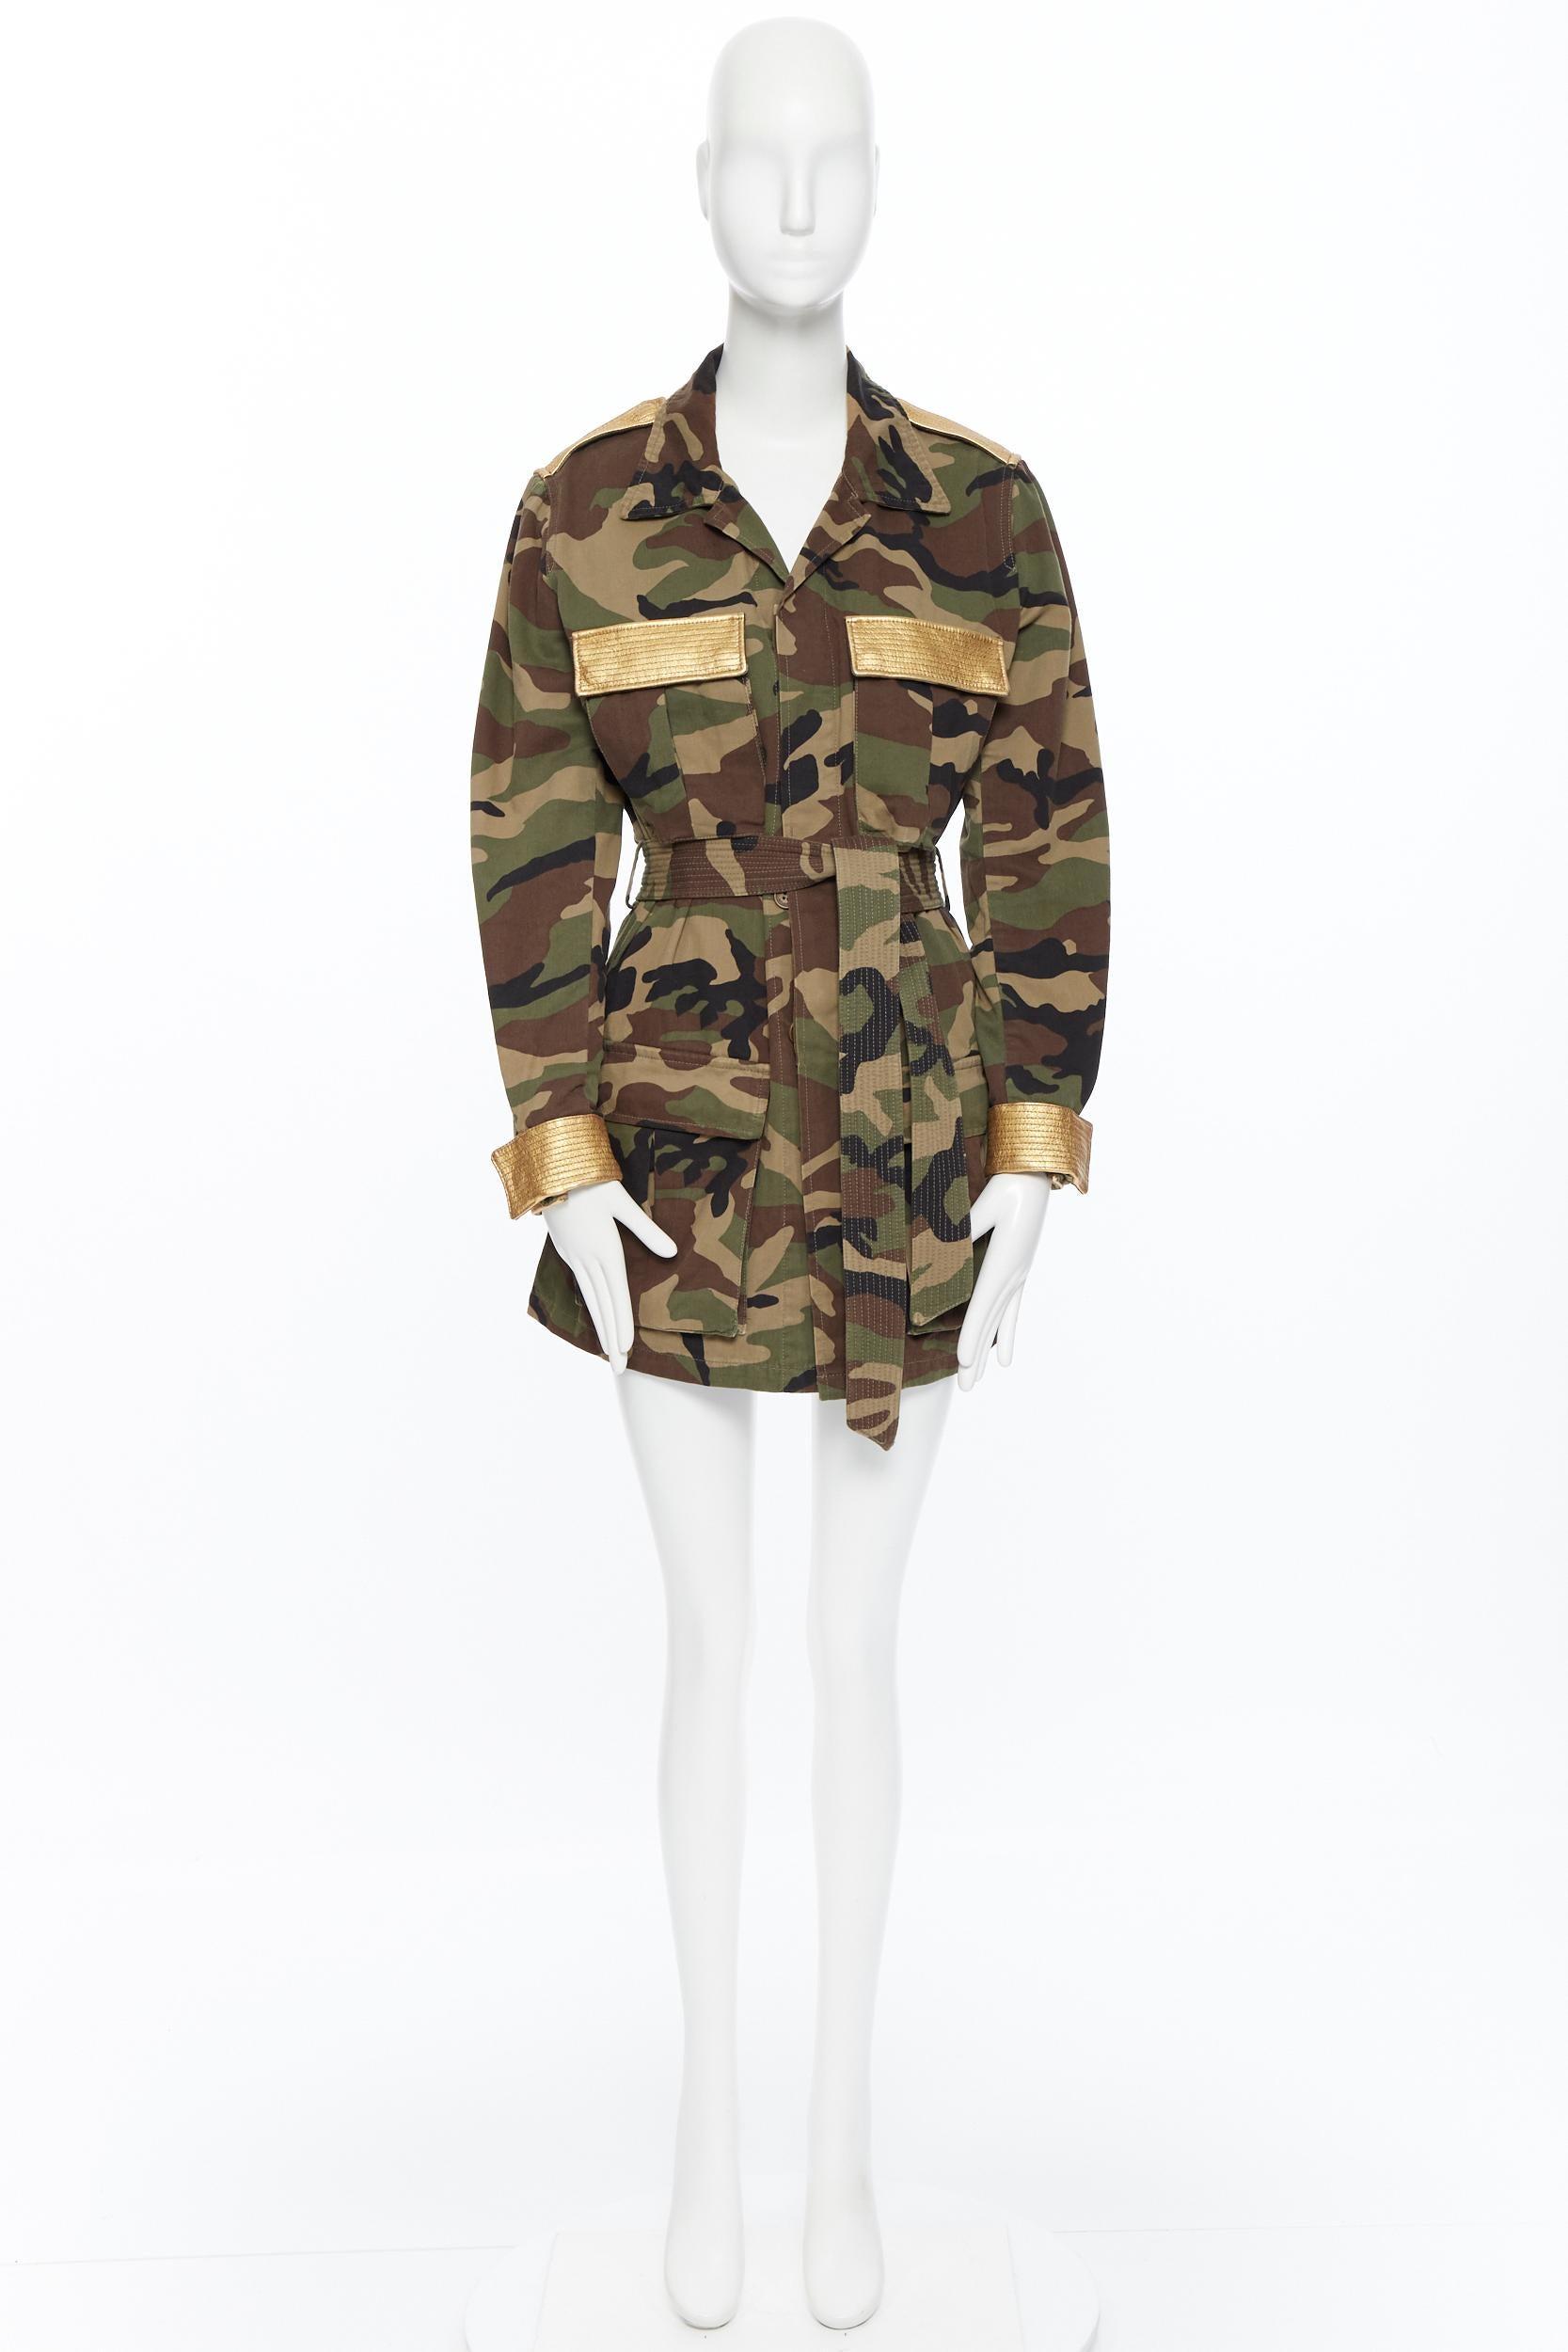 SAINT LAURENT green camouflage gold leather trimmed belted military jacket FR46
Brand: Saint Laurent
Collection: 2014
Model Name / Style: Camouflage jacket
Material: Cotton
Color: Green
Pattern: Camouflage
Closure: Button
Extra Detail: Green